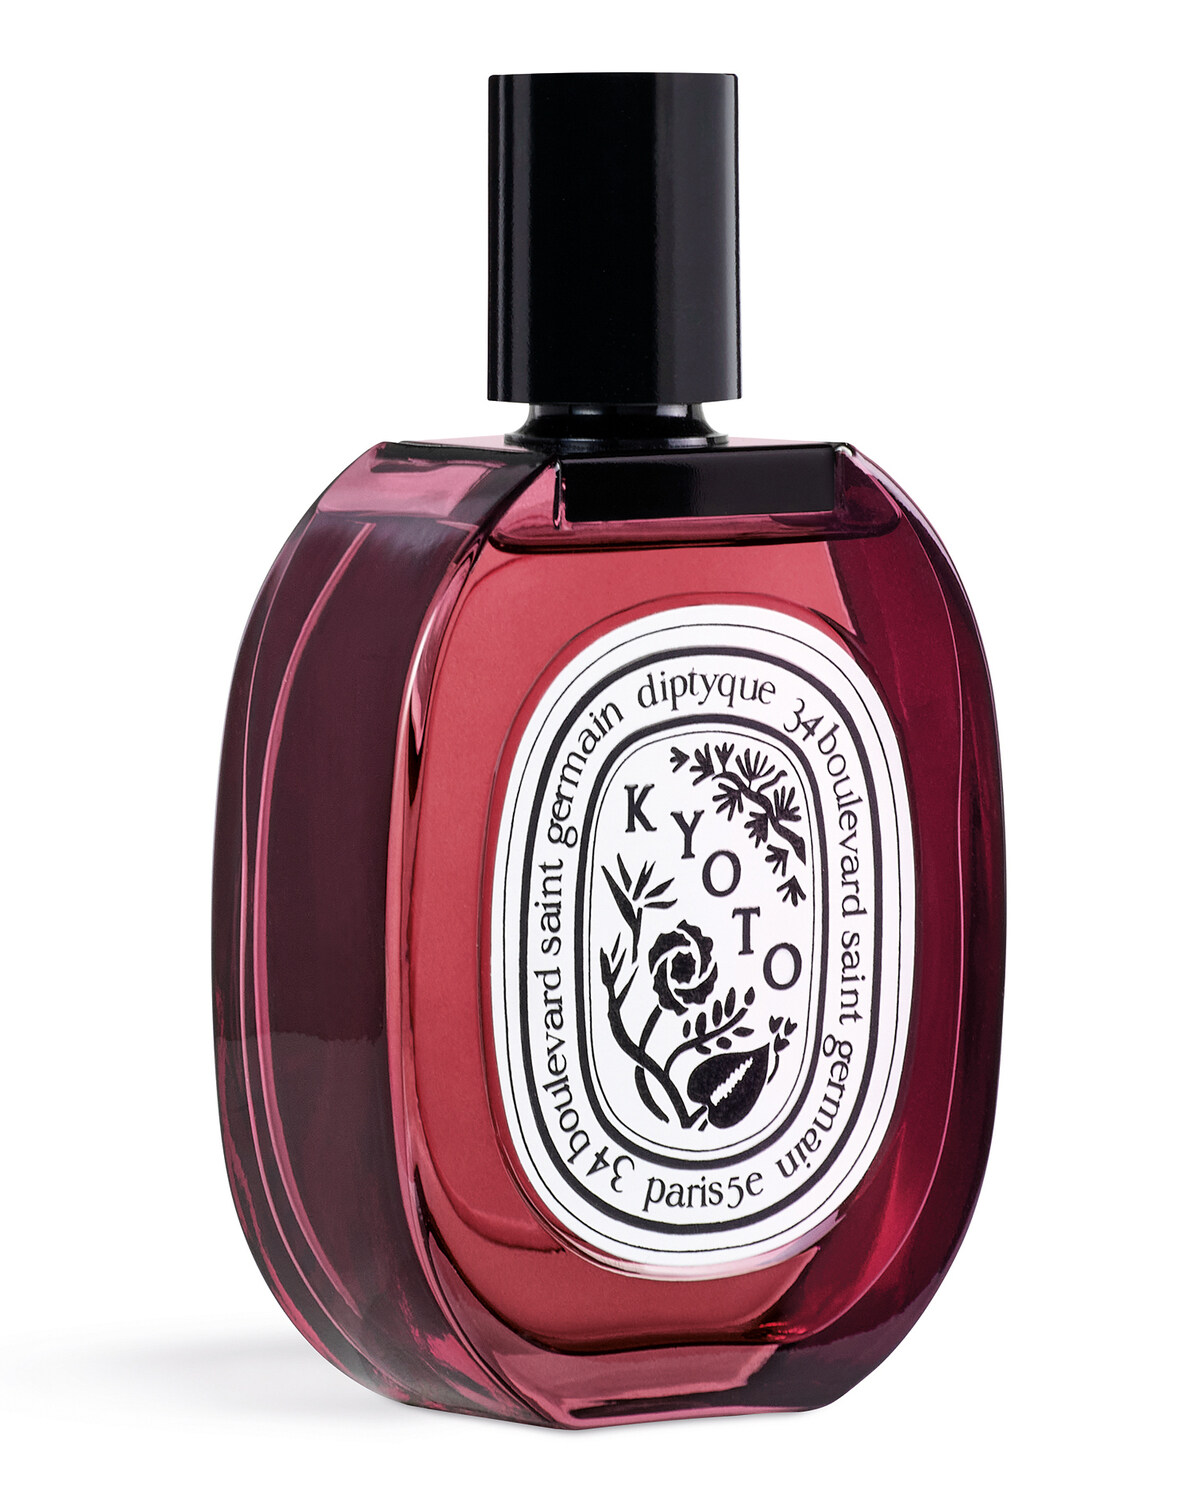 Kyoto by Diptyque » Reviews & Perfume Facts